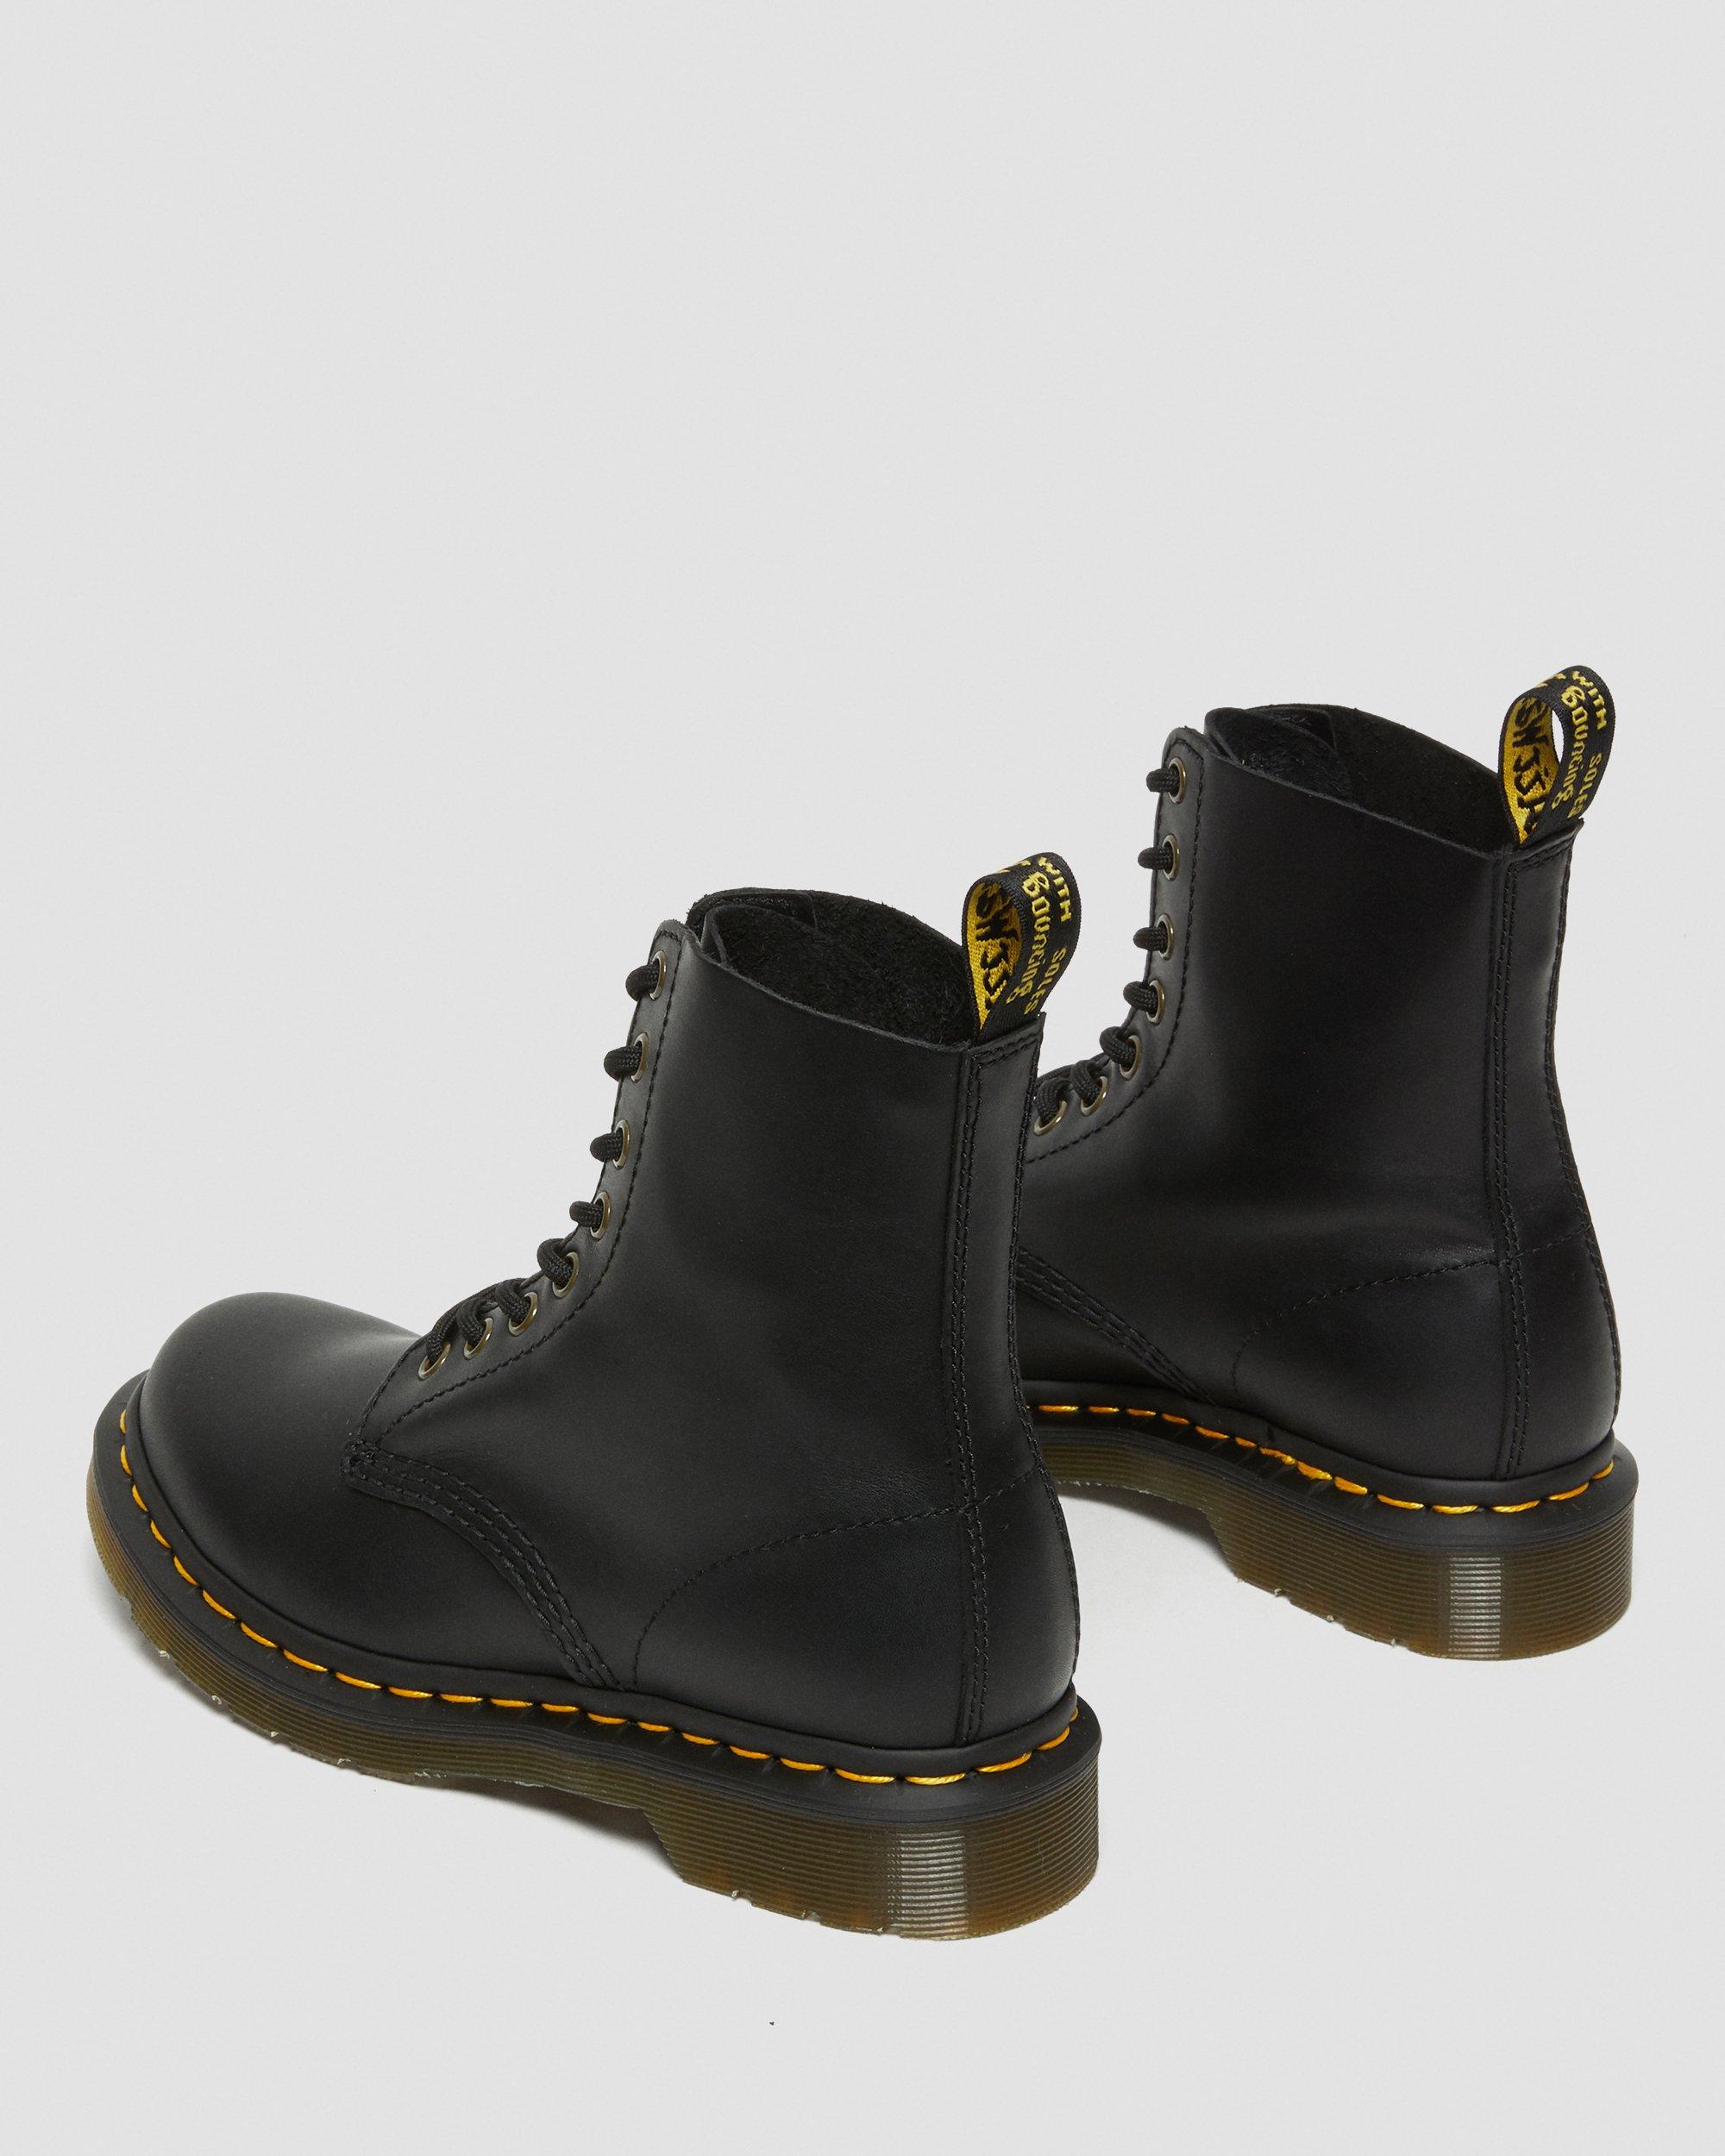 1460 PASCAL WOMEN'S WANAMA LEATHER BOOTS | Dr. Martens Official